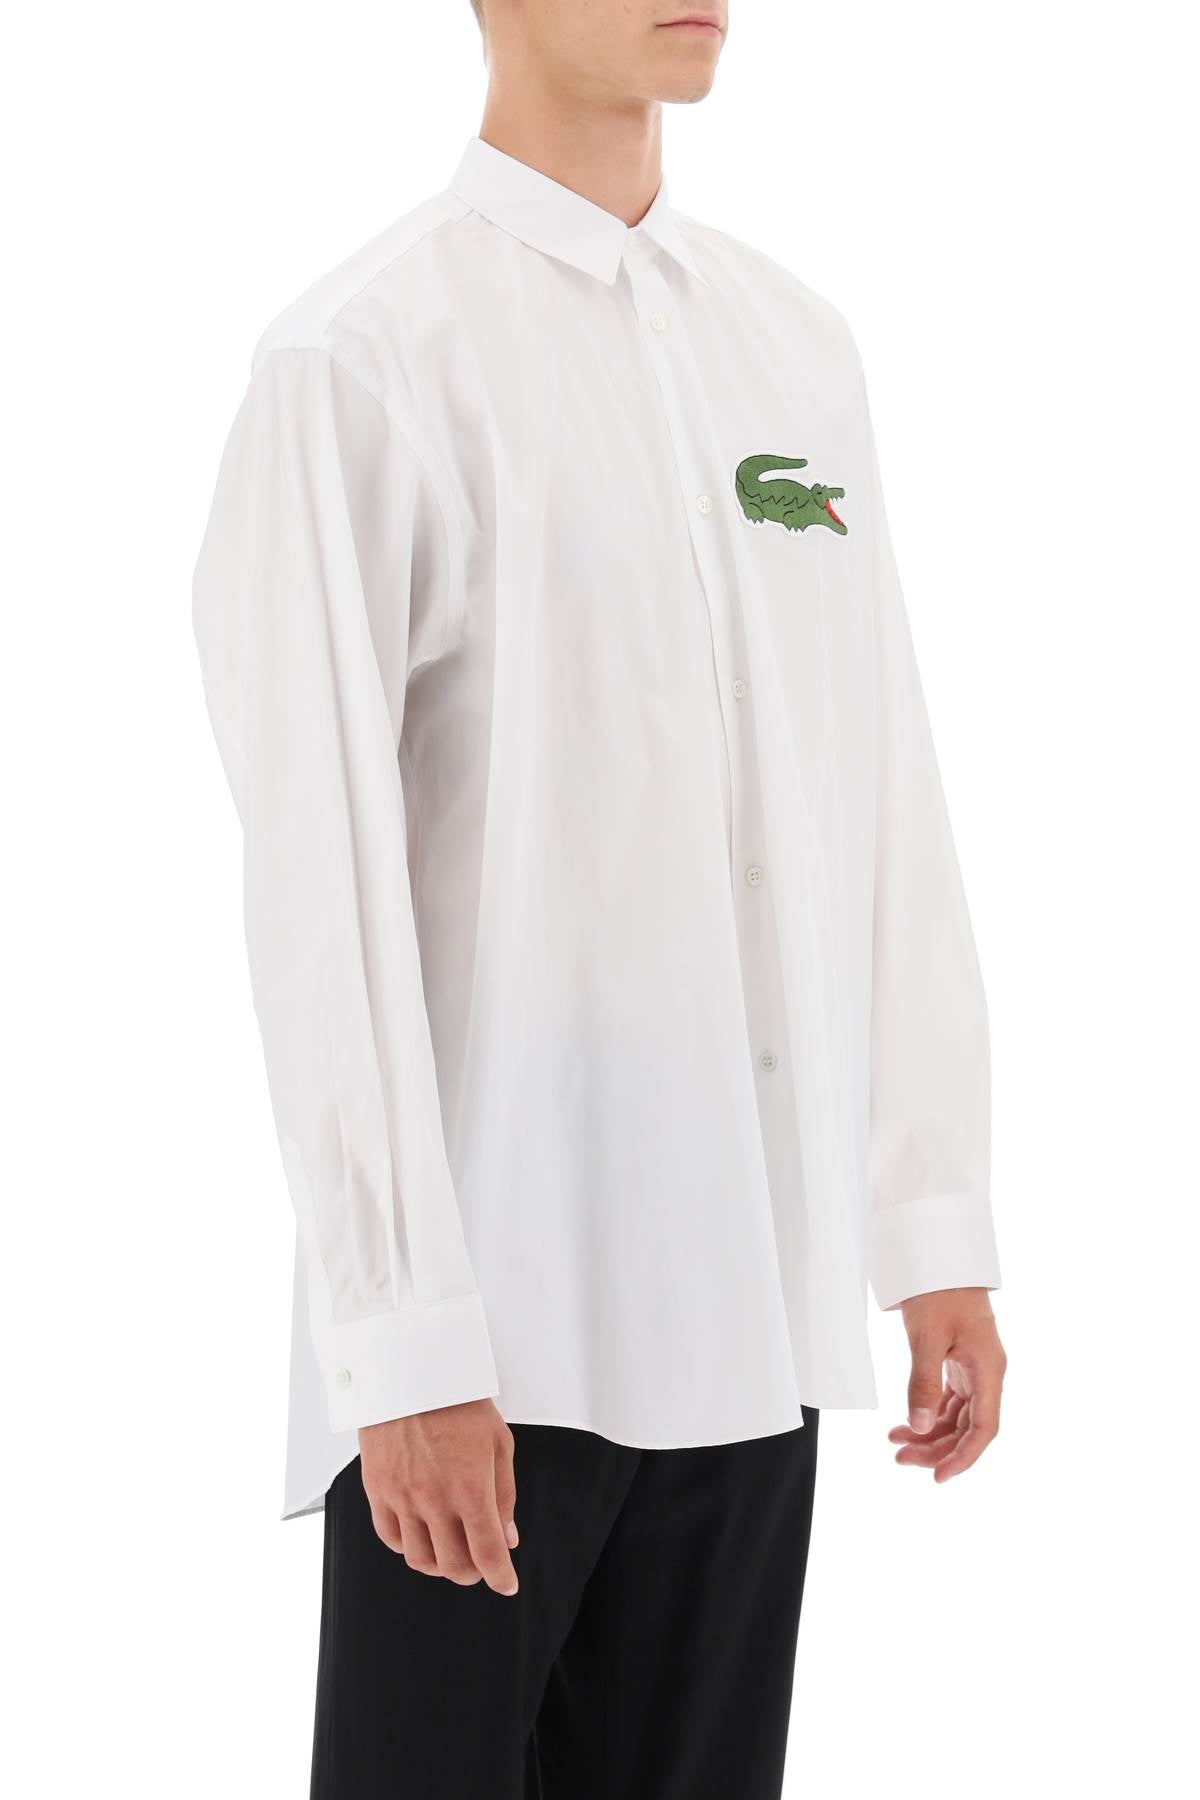 Comme des garcons shirt x lacoste oversized shirt with maxi patch-1